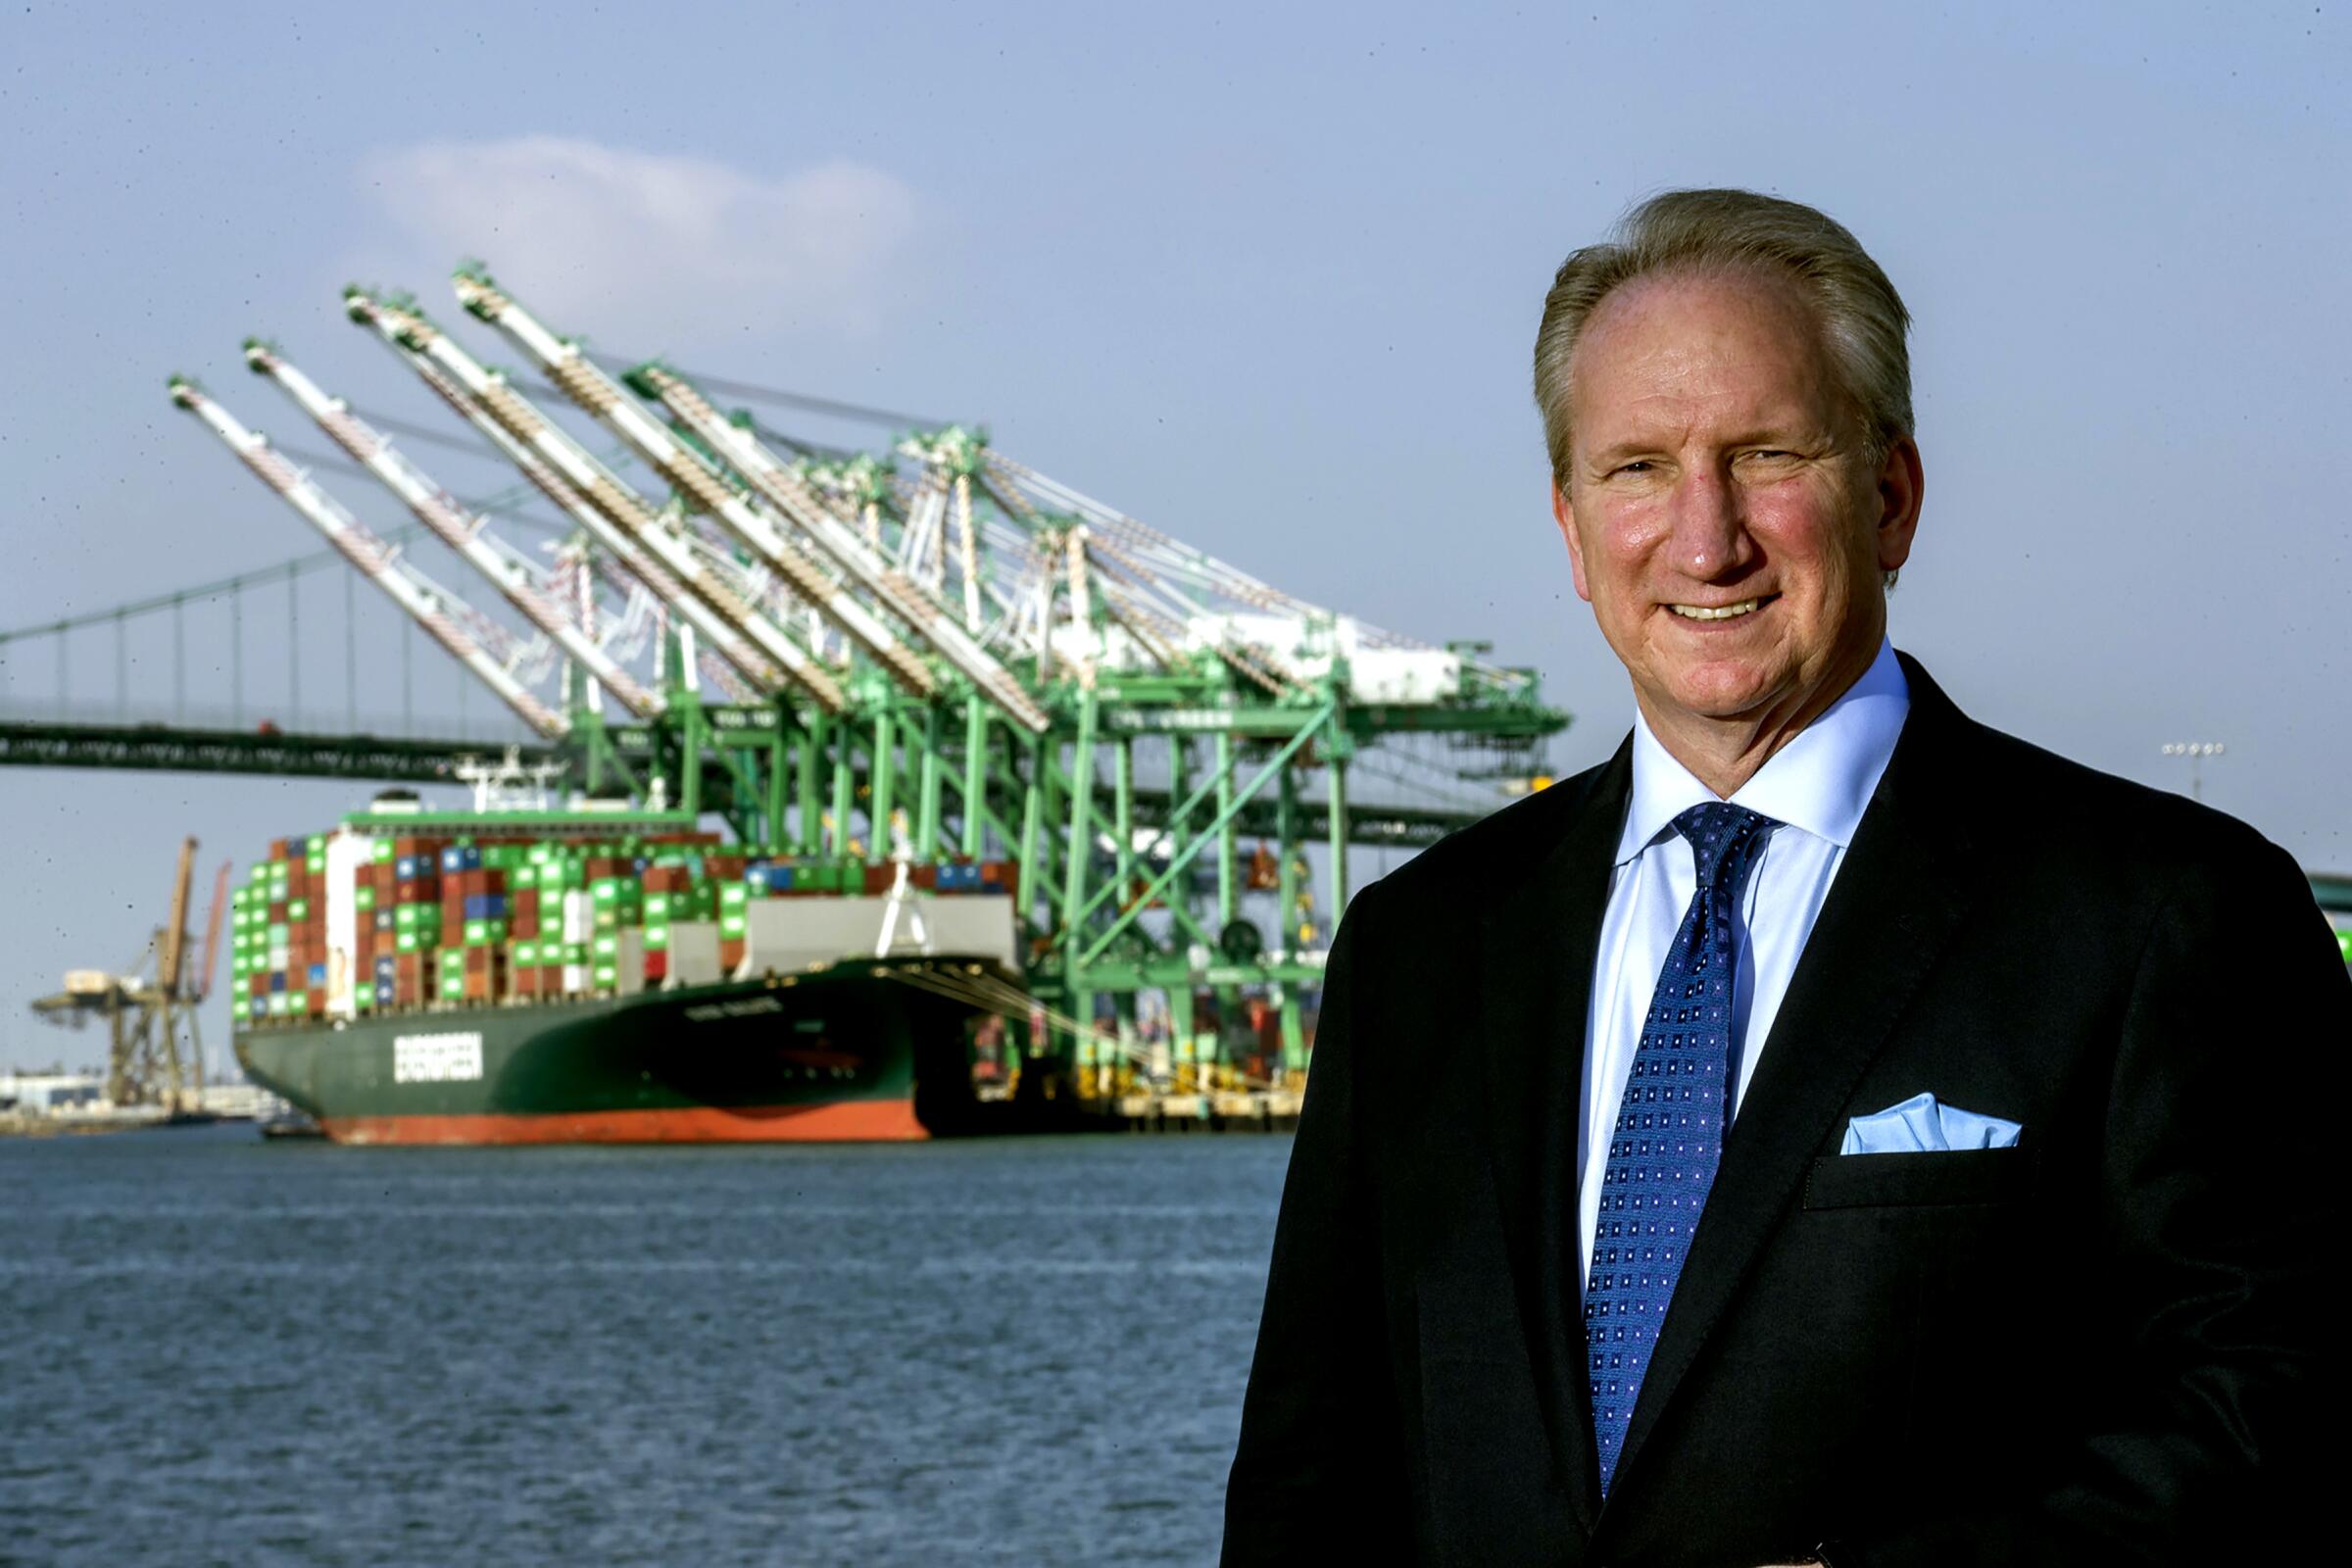 Gene Seroka standing in a black suit near the water with a container ship, cranes and a bridge in the distance